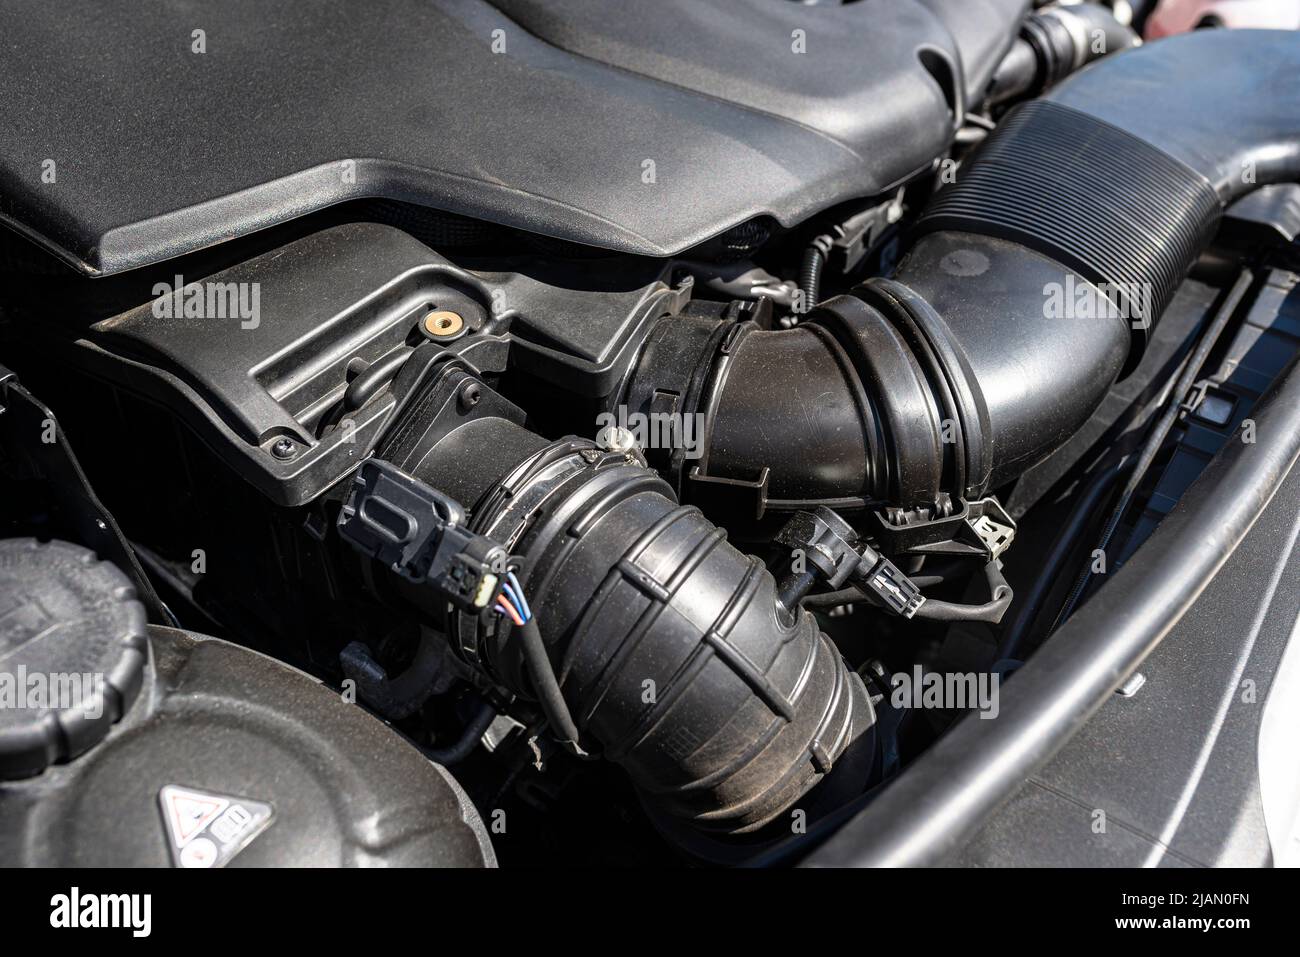 Plastic air intake pipes for a modern 2.2 liter diesel engine with a capacity of 220 horsepower. Stock Photo